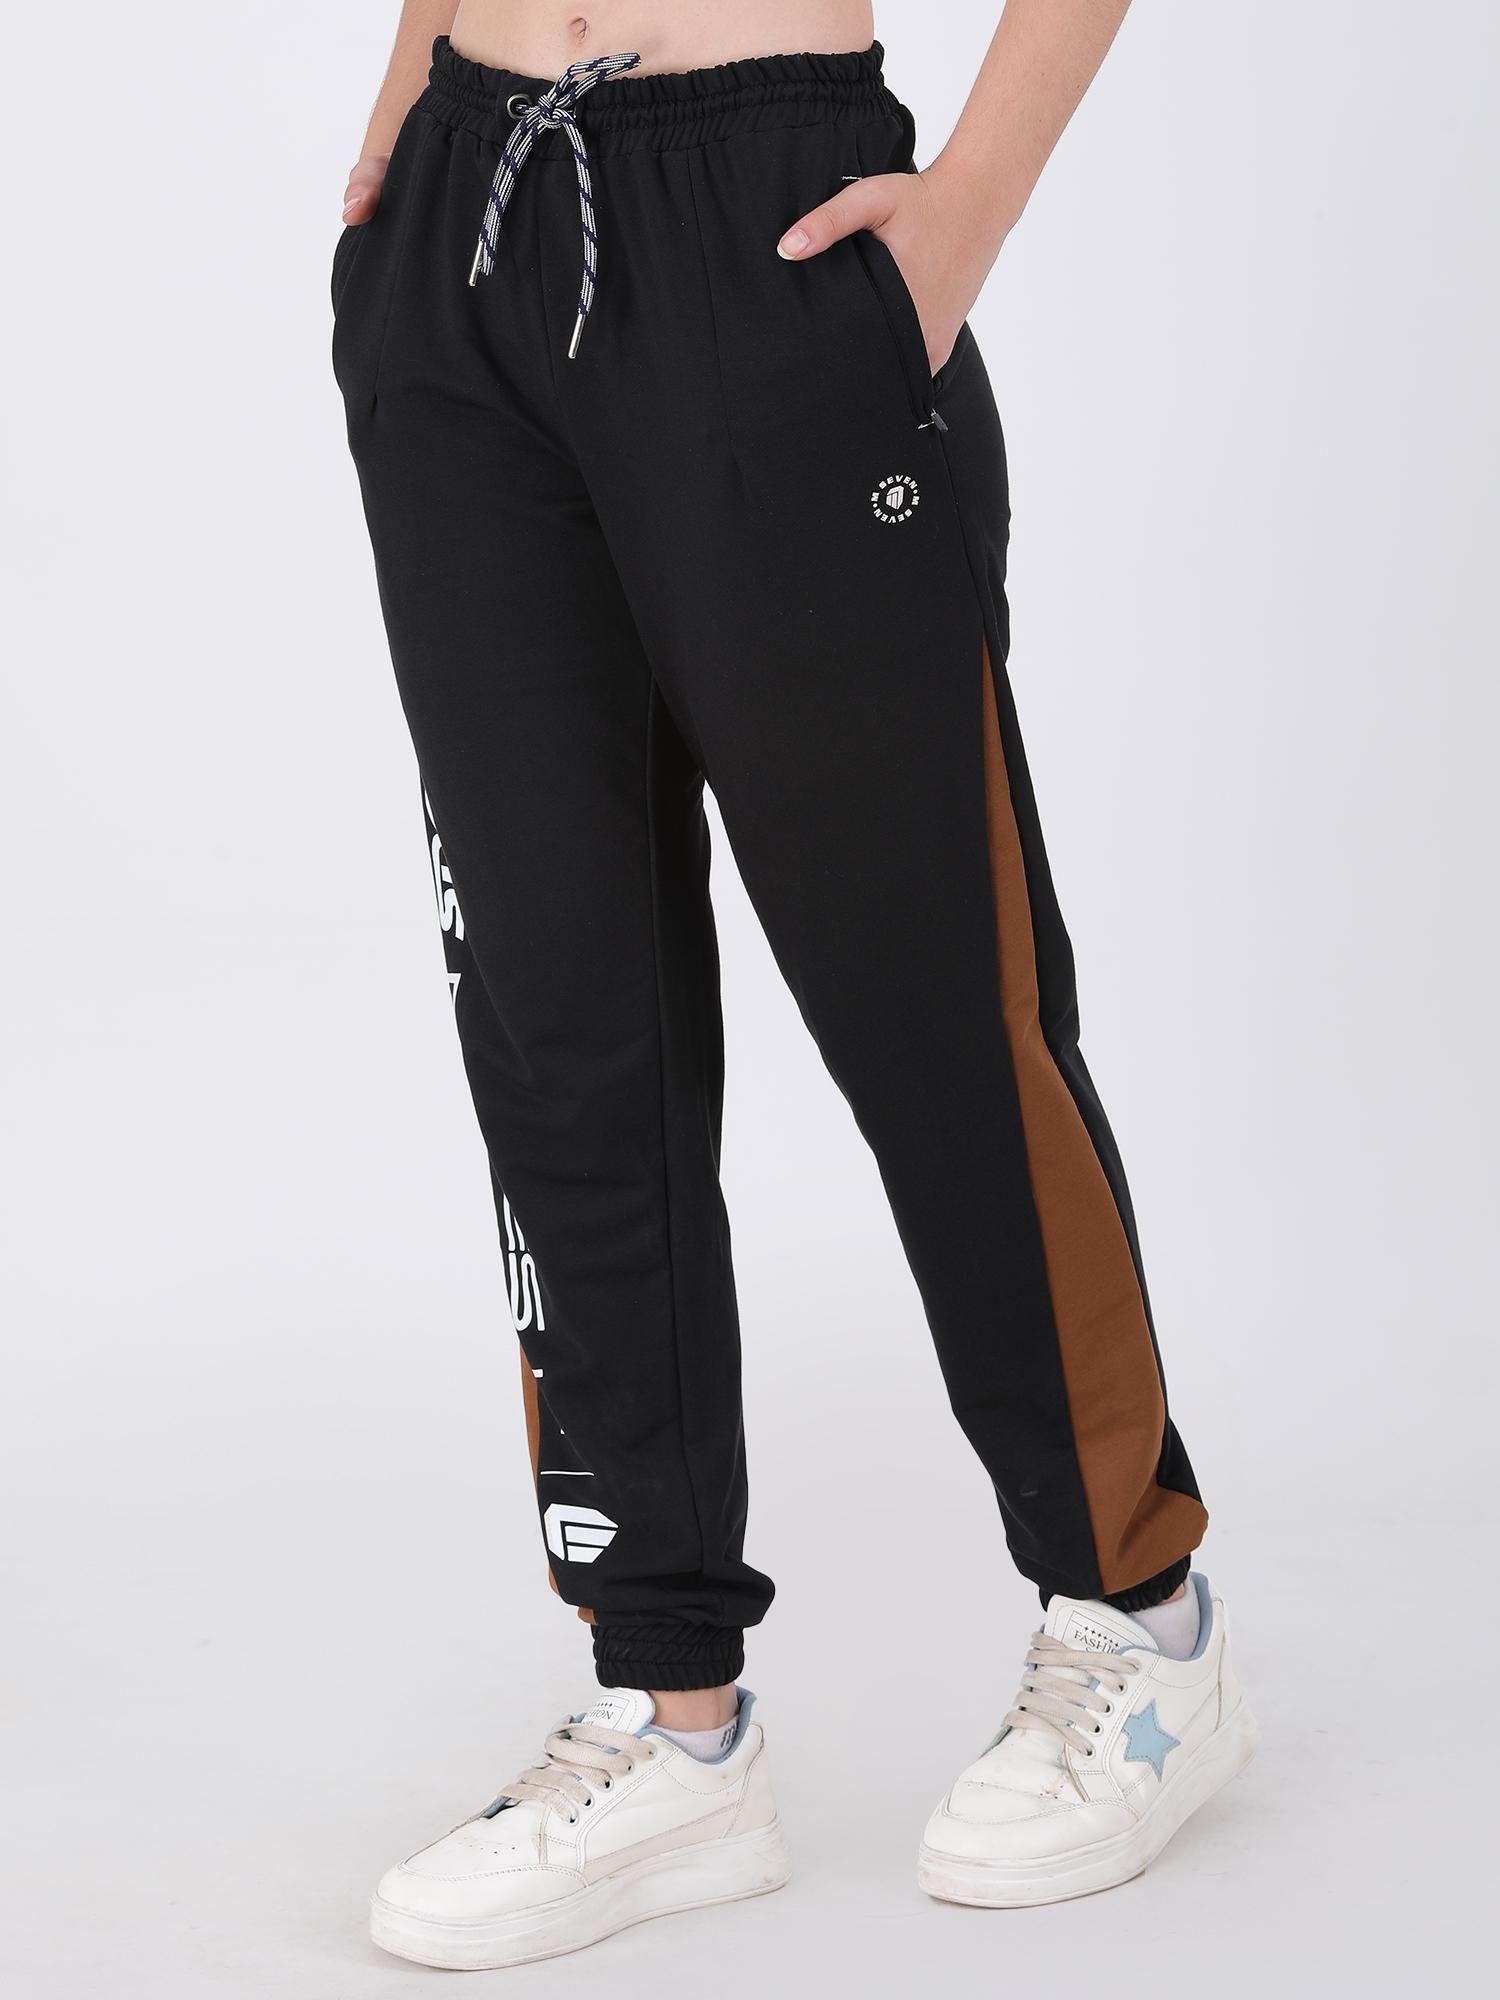 M7 Empire Women's Cotton Terry Lower | Track Pants